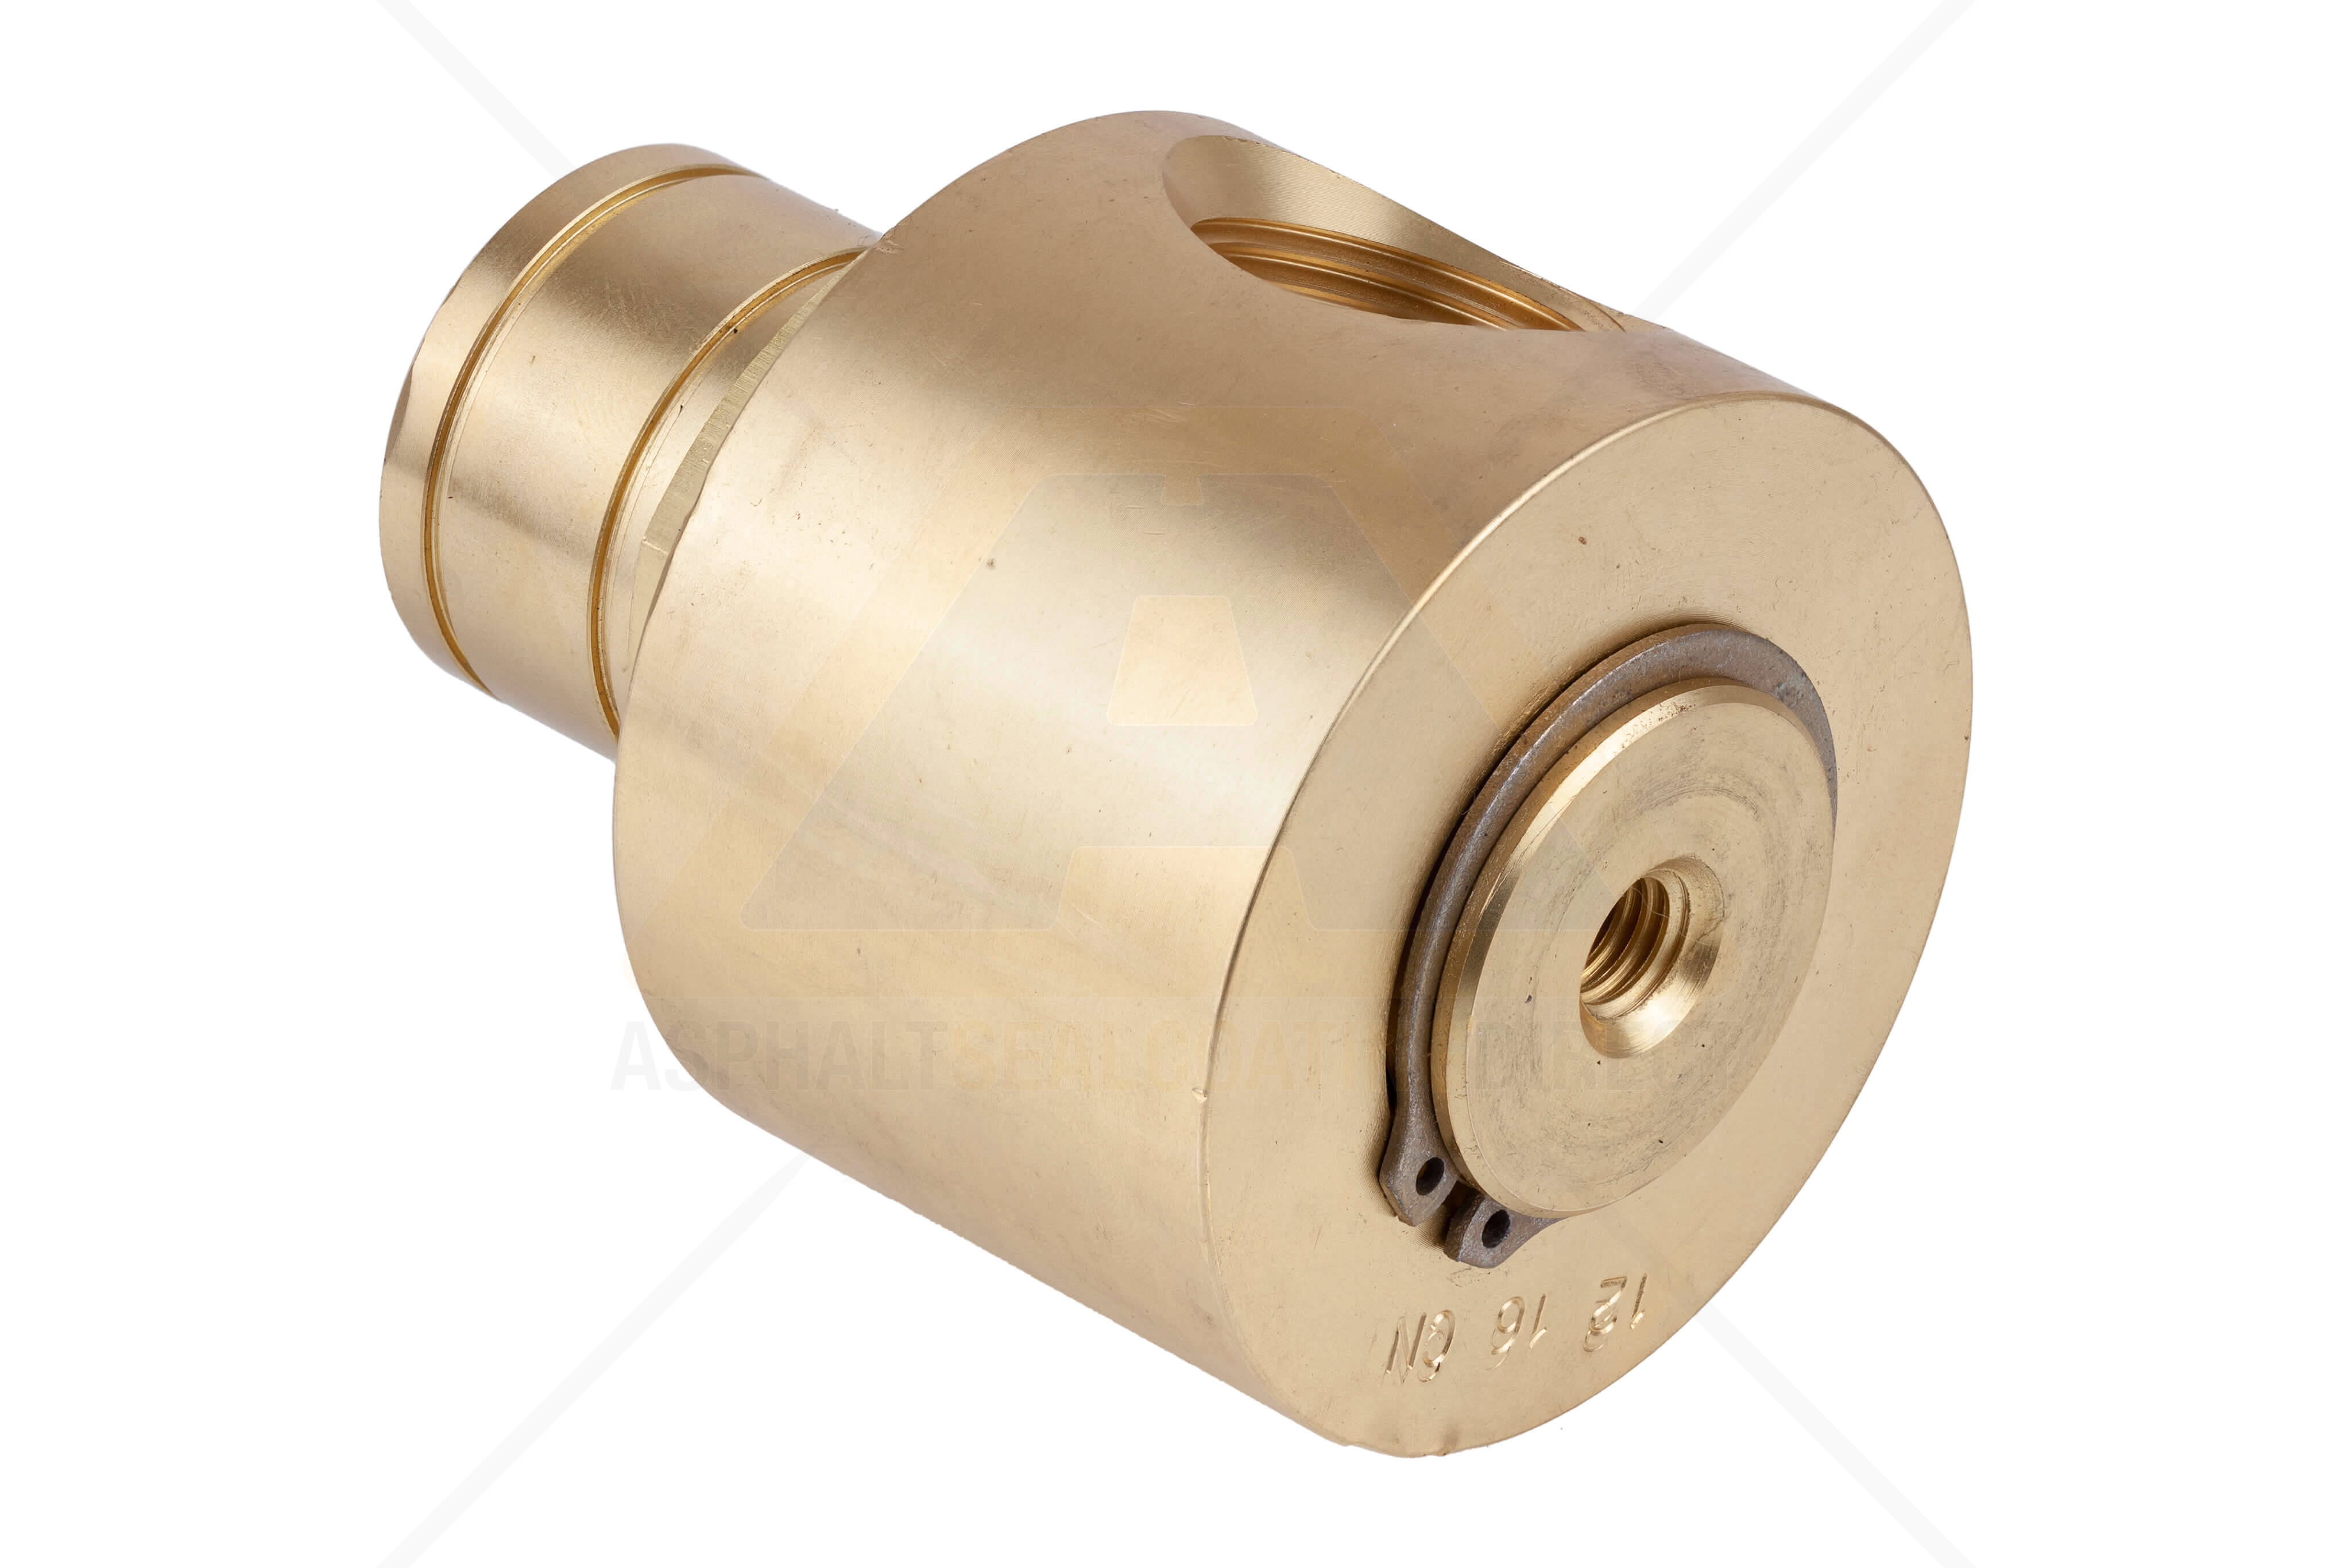 https://www.asphaltsealcoatingdirect.com/files/styles/uc_product_full/public/dynamic/content/product/image/1559/cox-reel-union-seal-end-426-1.jpg?itok=T1B0yeq2